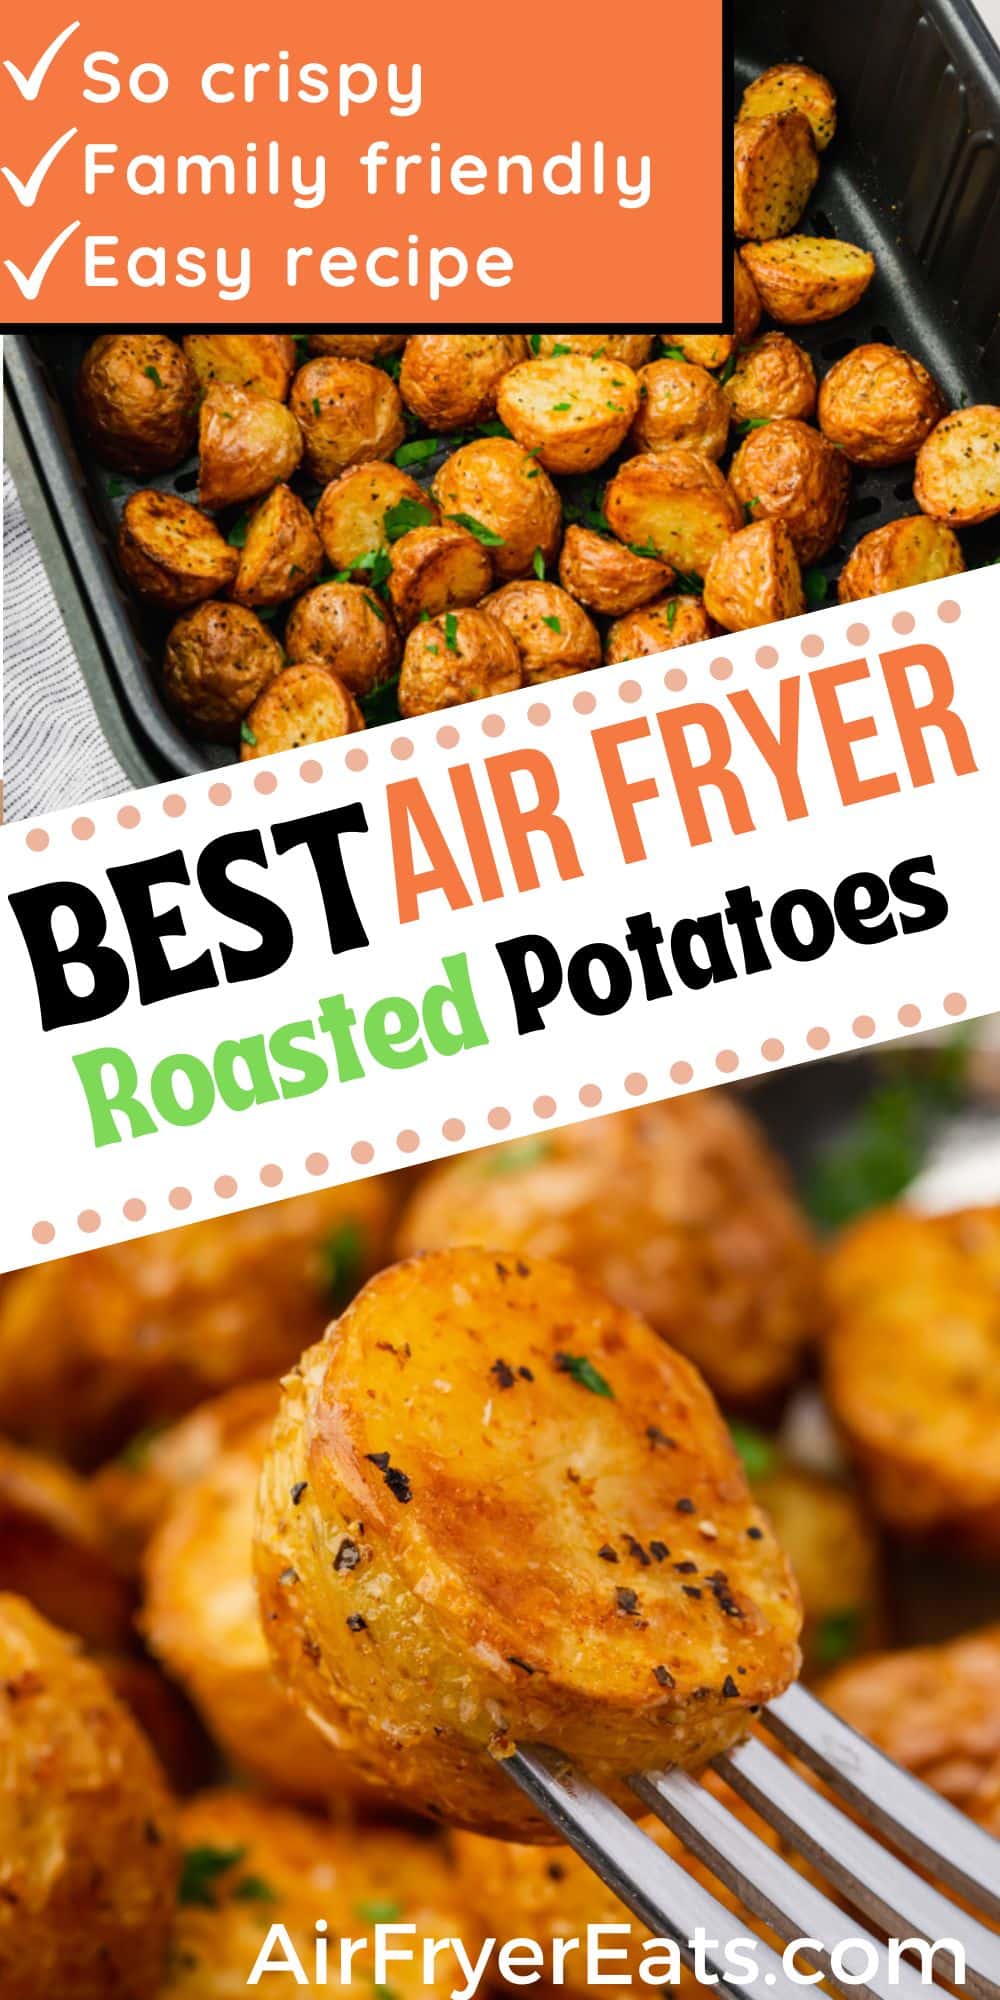 If you're looking for the fastest and easiest way to roast baby potatoes, this recipe for Air Fryer Roasted Potatoes is exactly what you need. via @vegetarianmamma